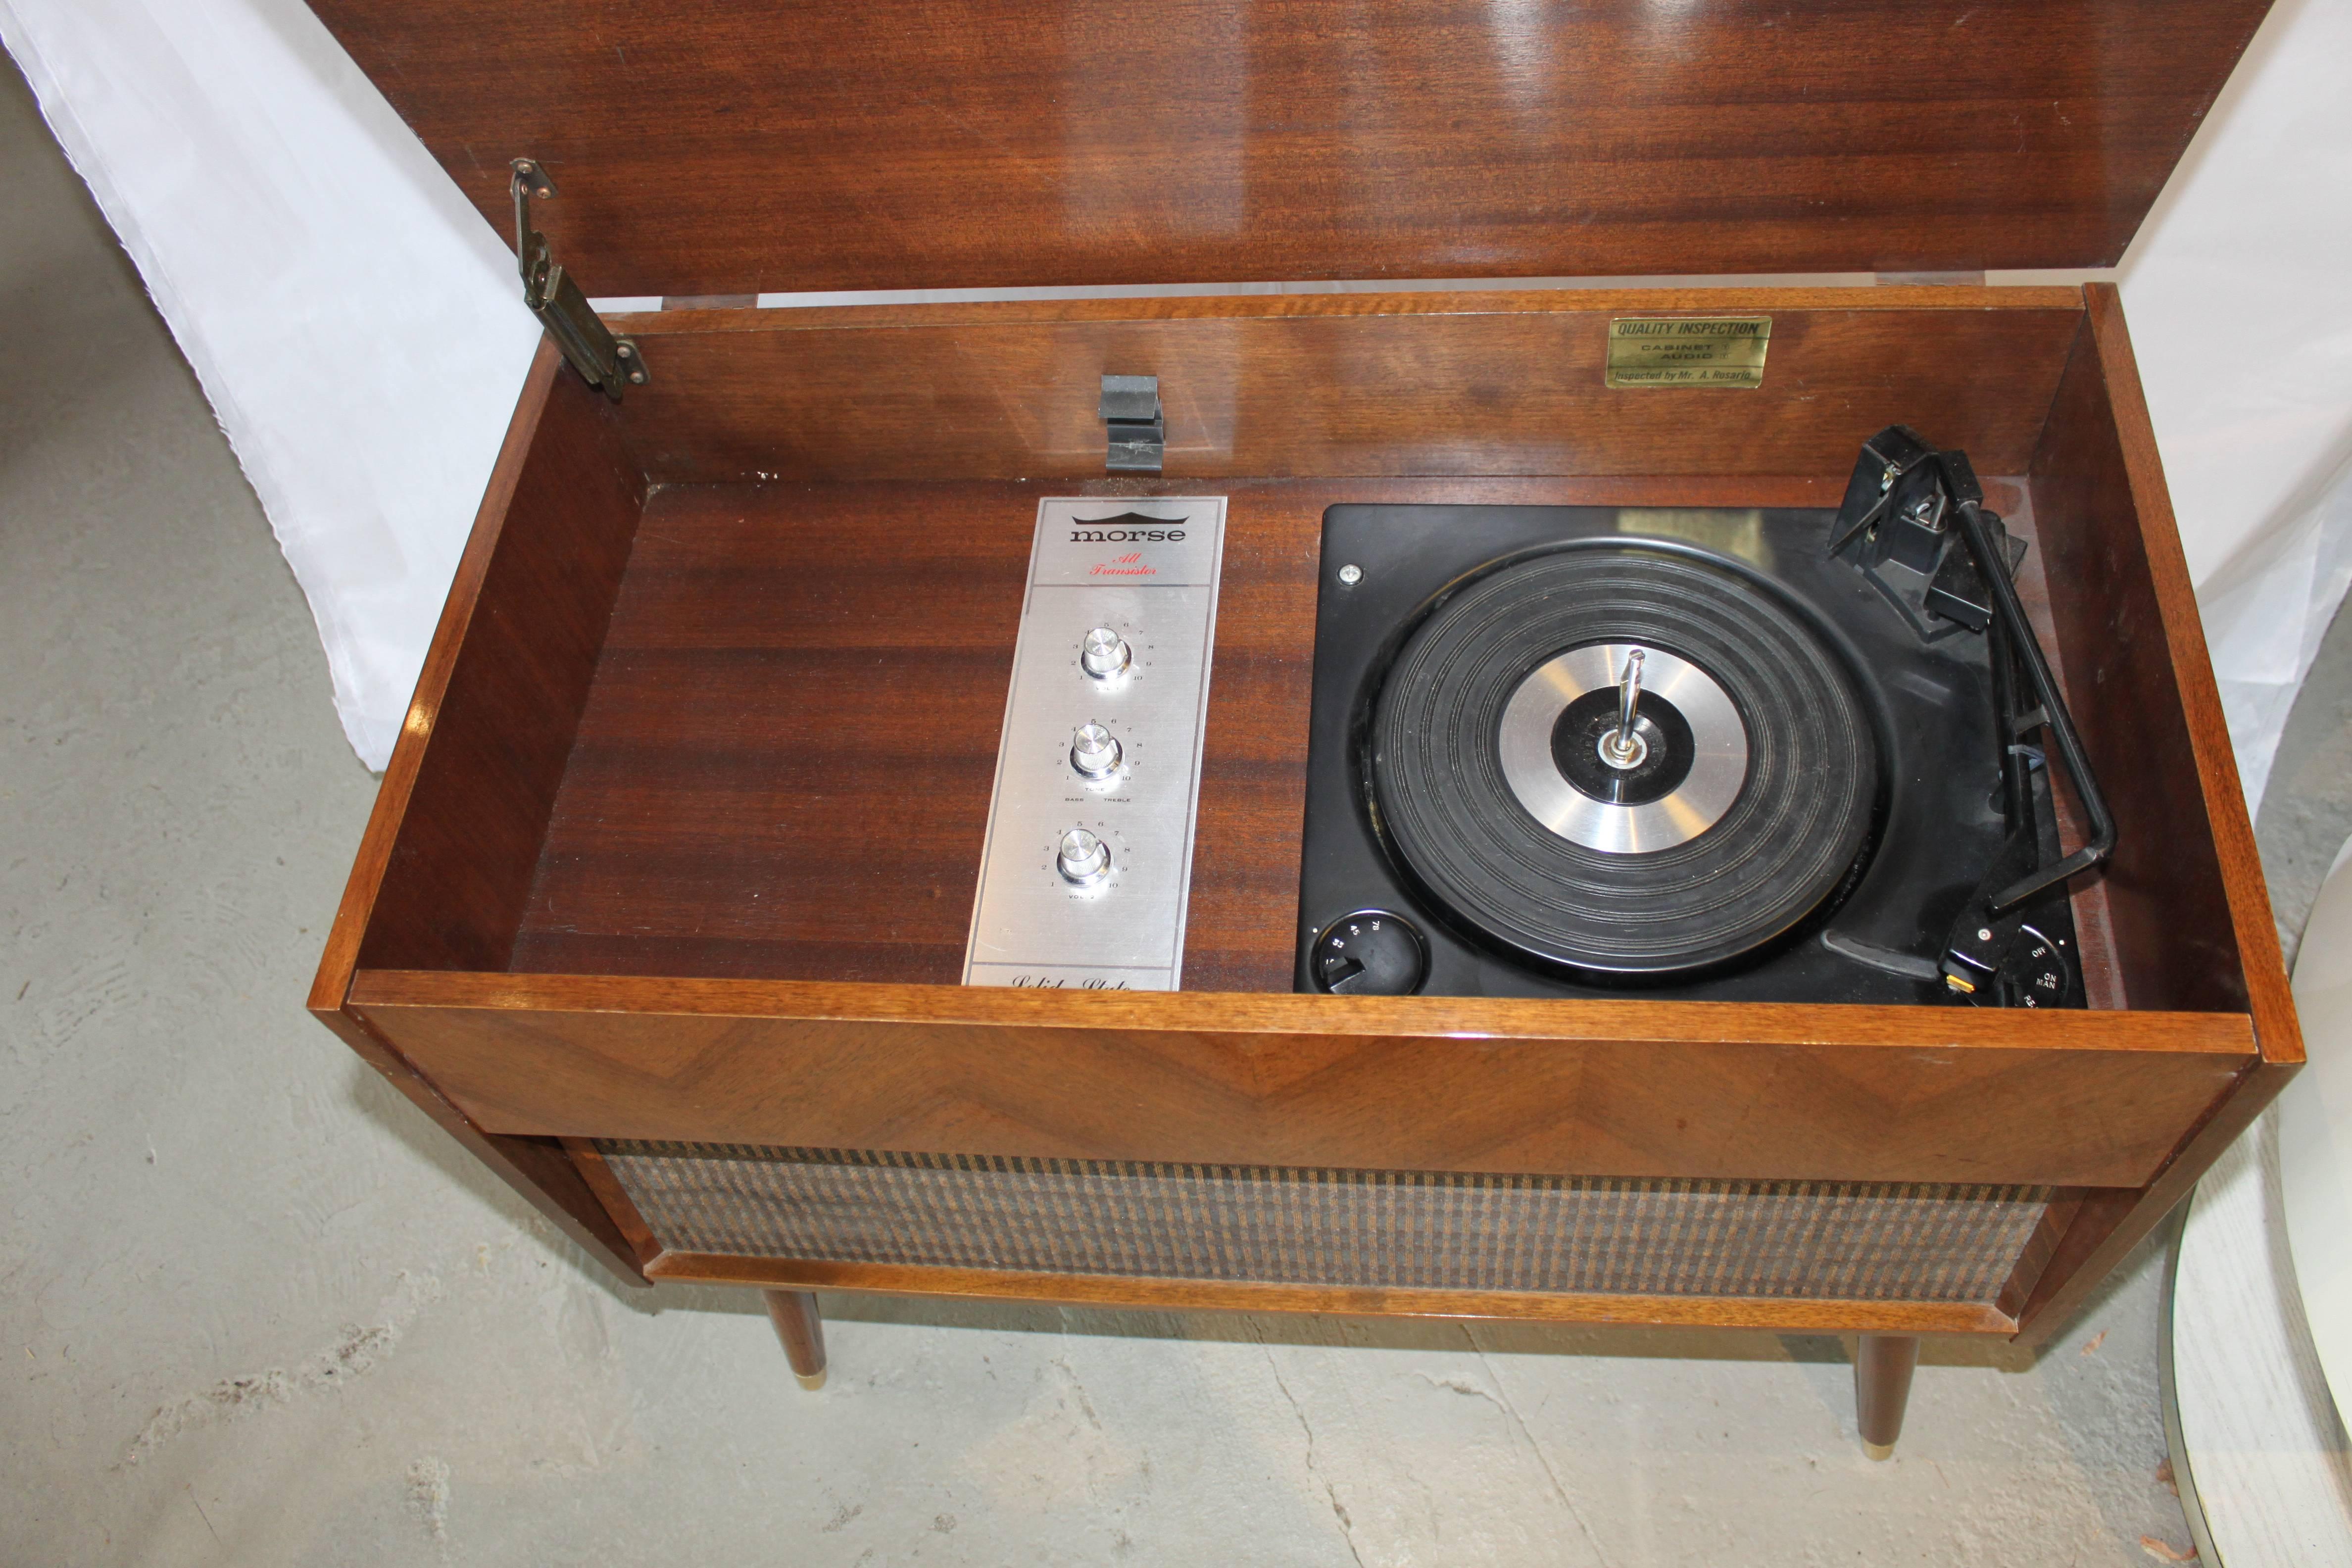 Awesome vintage records player. Mechanically it has been upgraded. We do not have warranty on the mechanical.